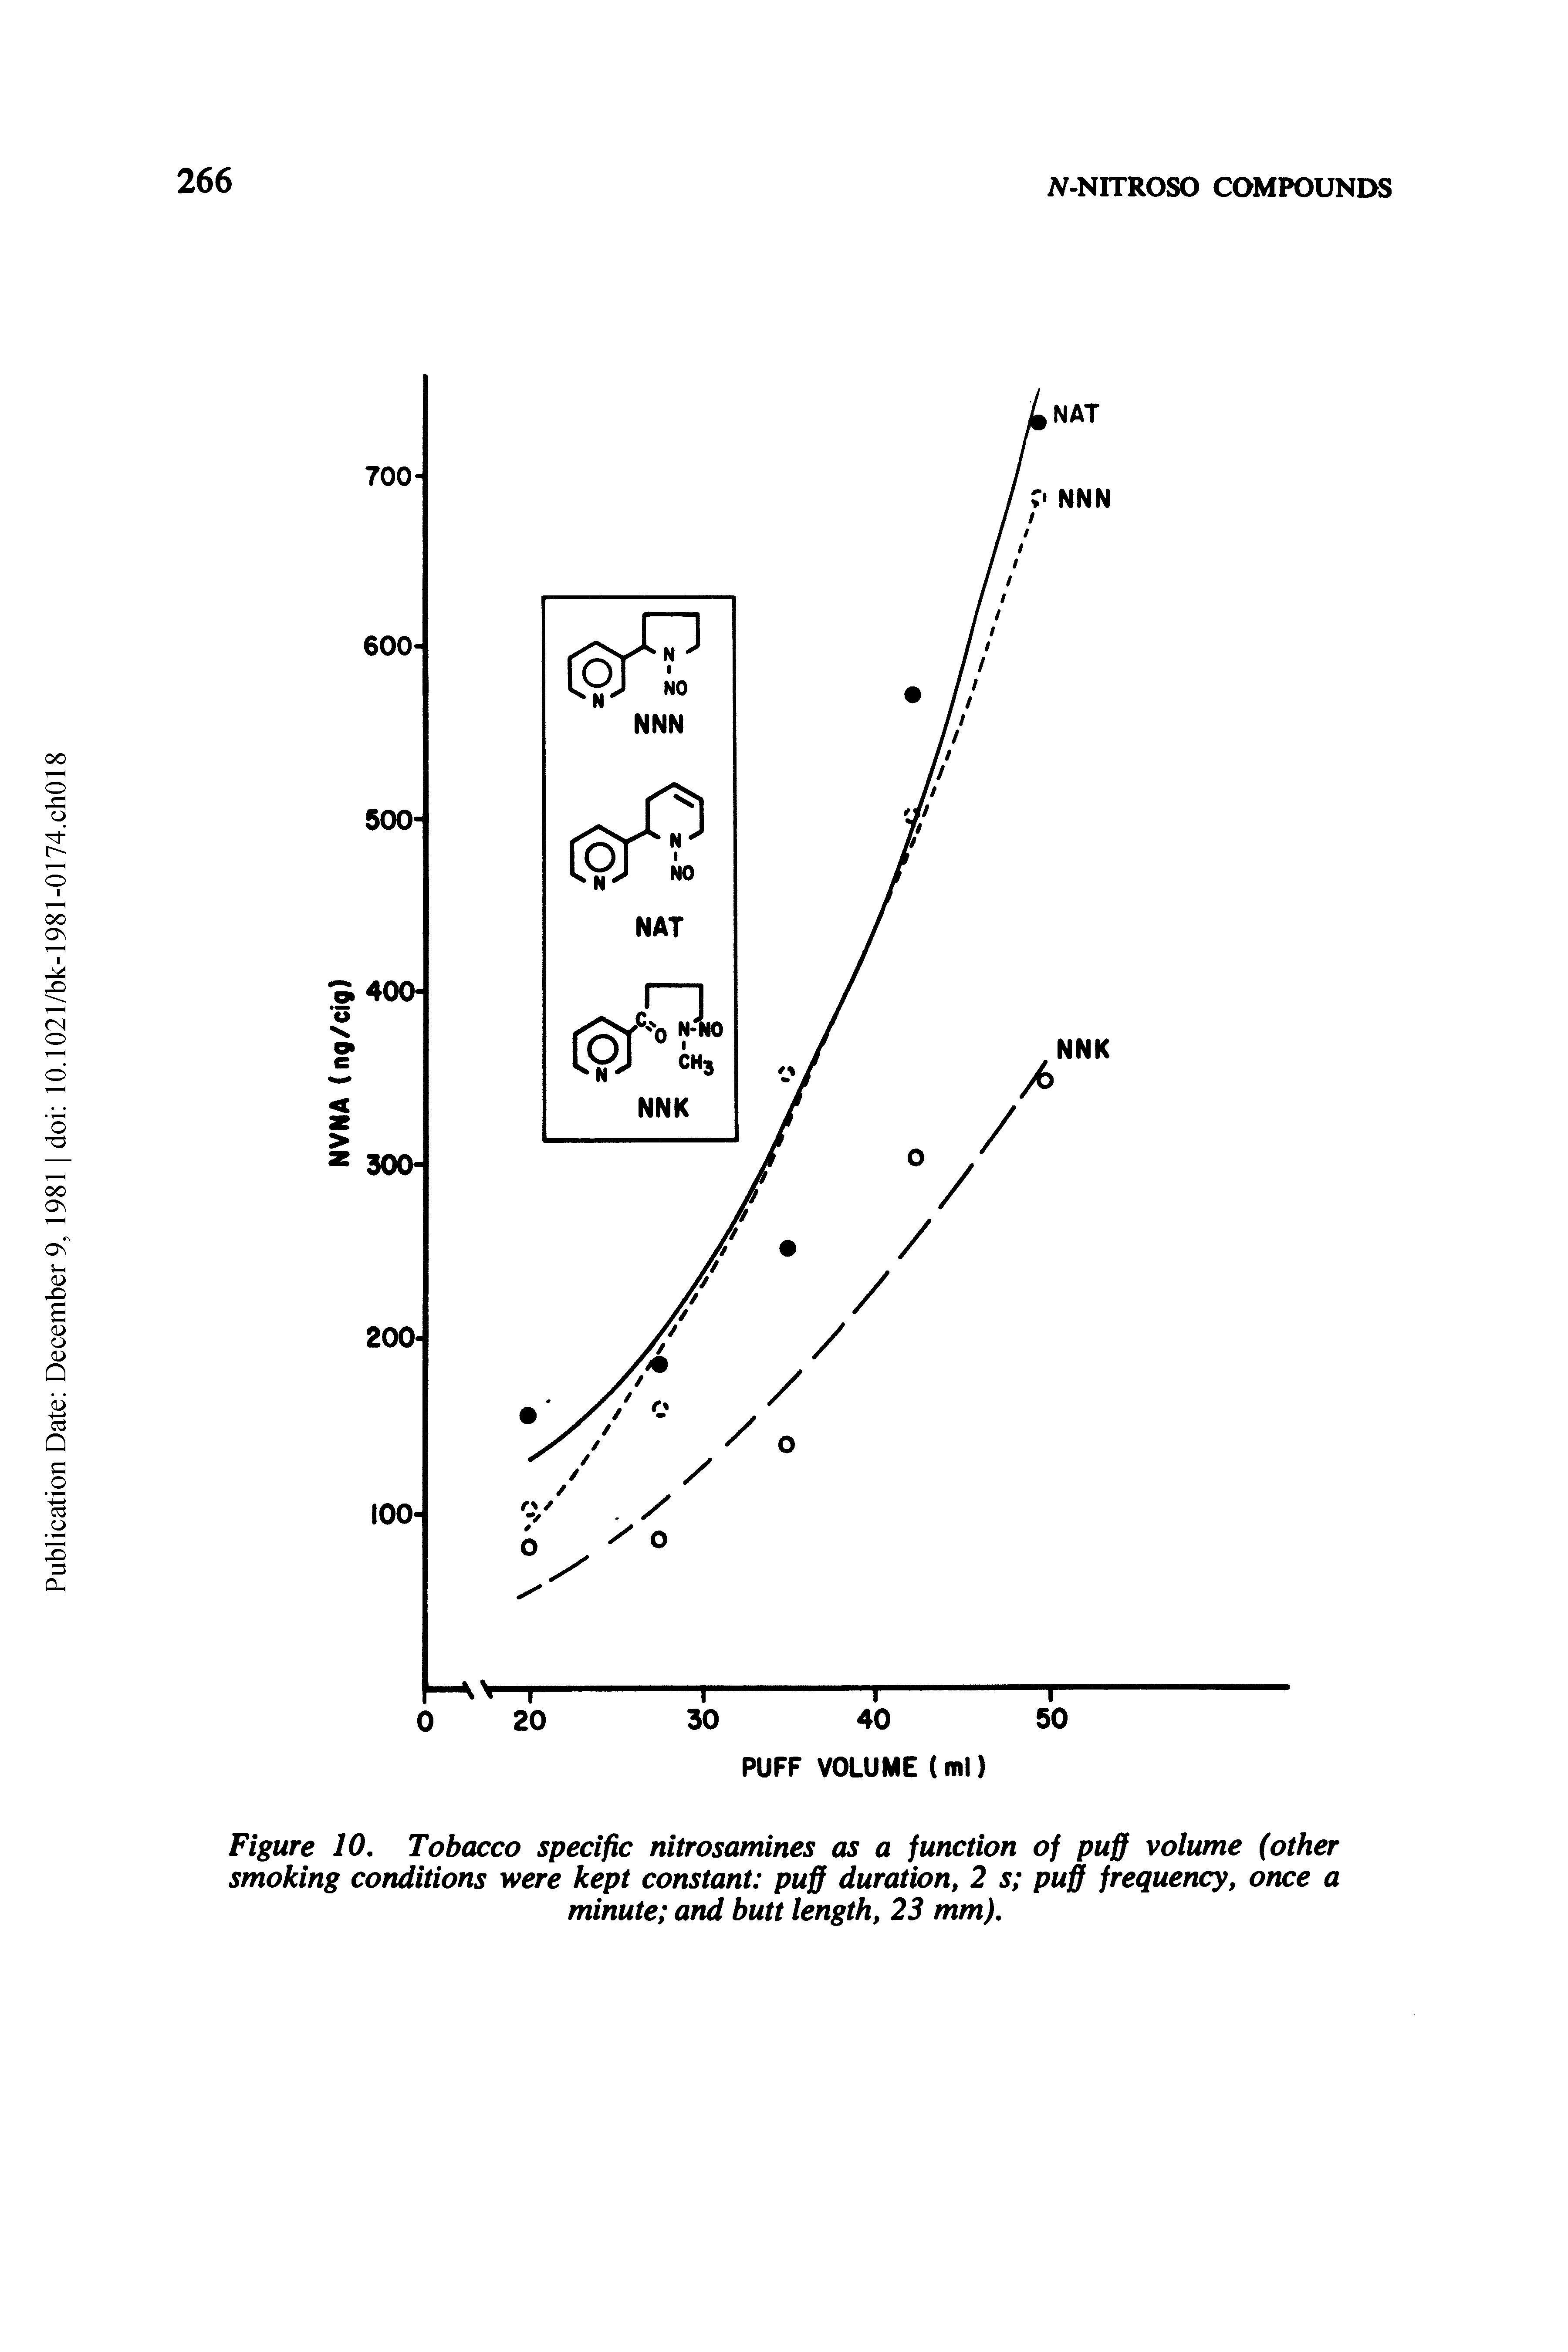 Figure 10, Tobacco specific nitrosamines as a function of puff volume (other smoking conditions were kept constant puff duration, 2 s puff frequency, once a minute and butt length, 23 mm).